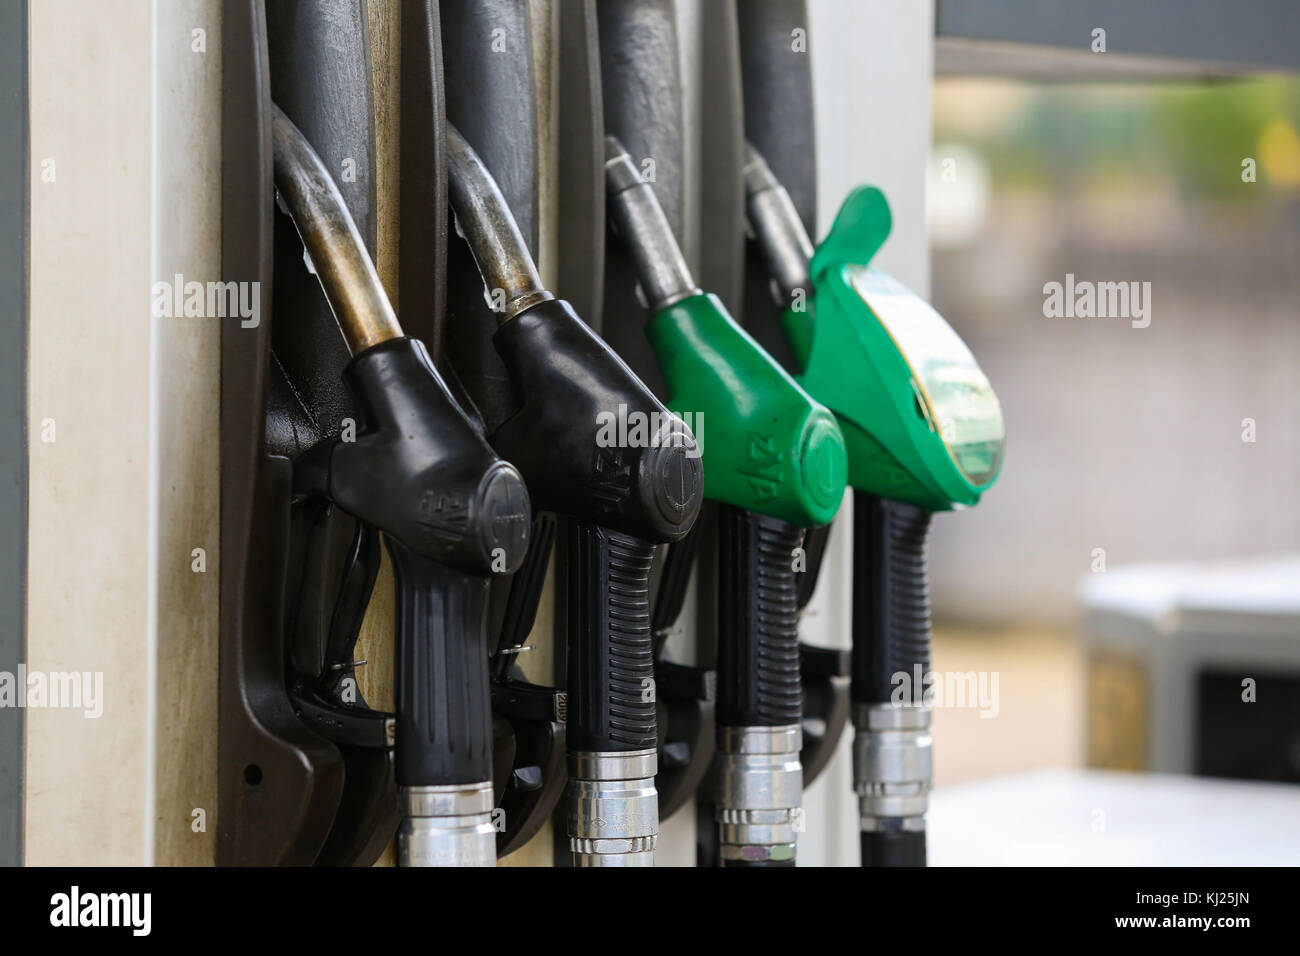 North London. UK 21 Nov 2017 - Motor fuel pumps on a petrol station forecourt in North London as Britain's Chancellor of the Exchequer Philip Hammond is expected to announce an increase in motor fuel tax in his autumn budget on Wednesday, 22 November 2017. Stock Photo